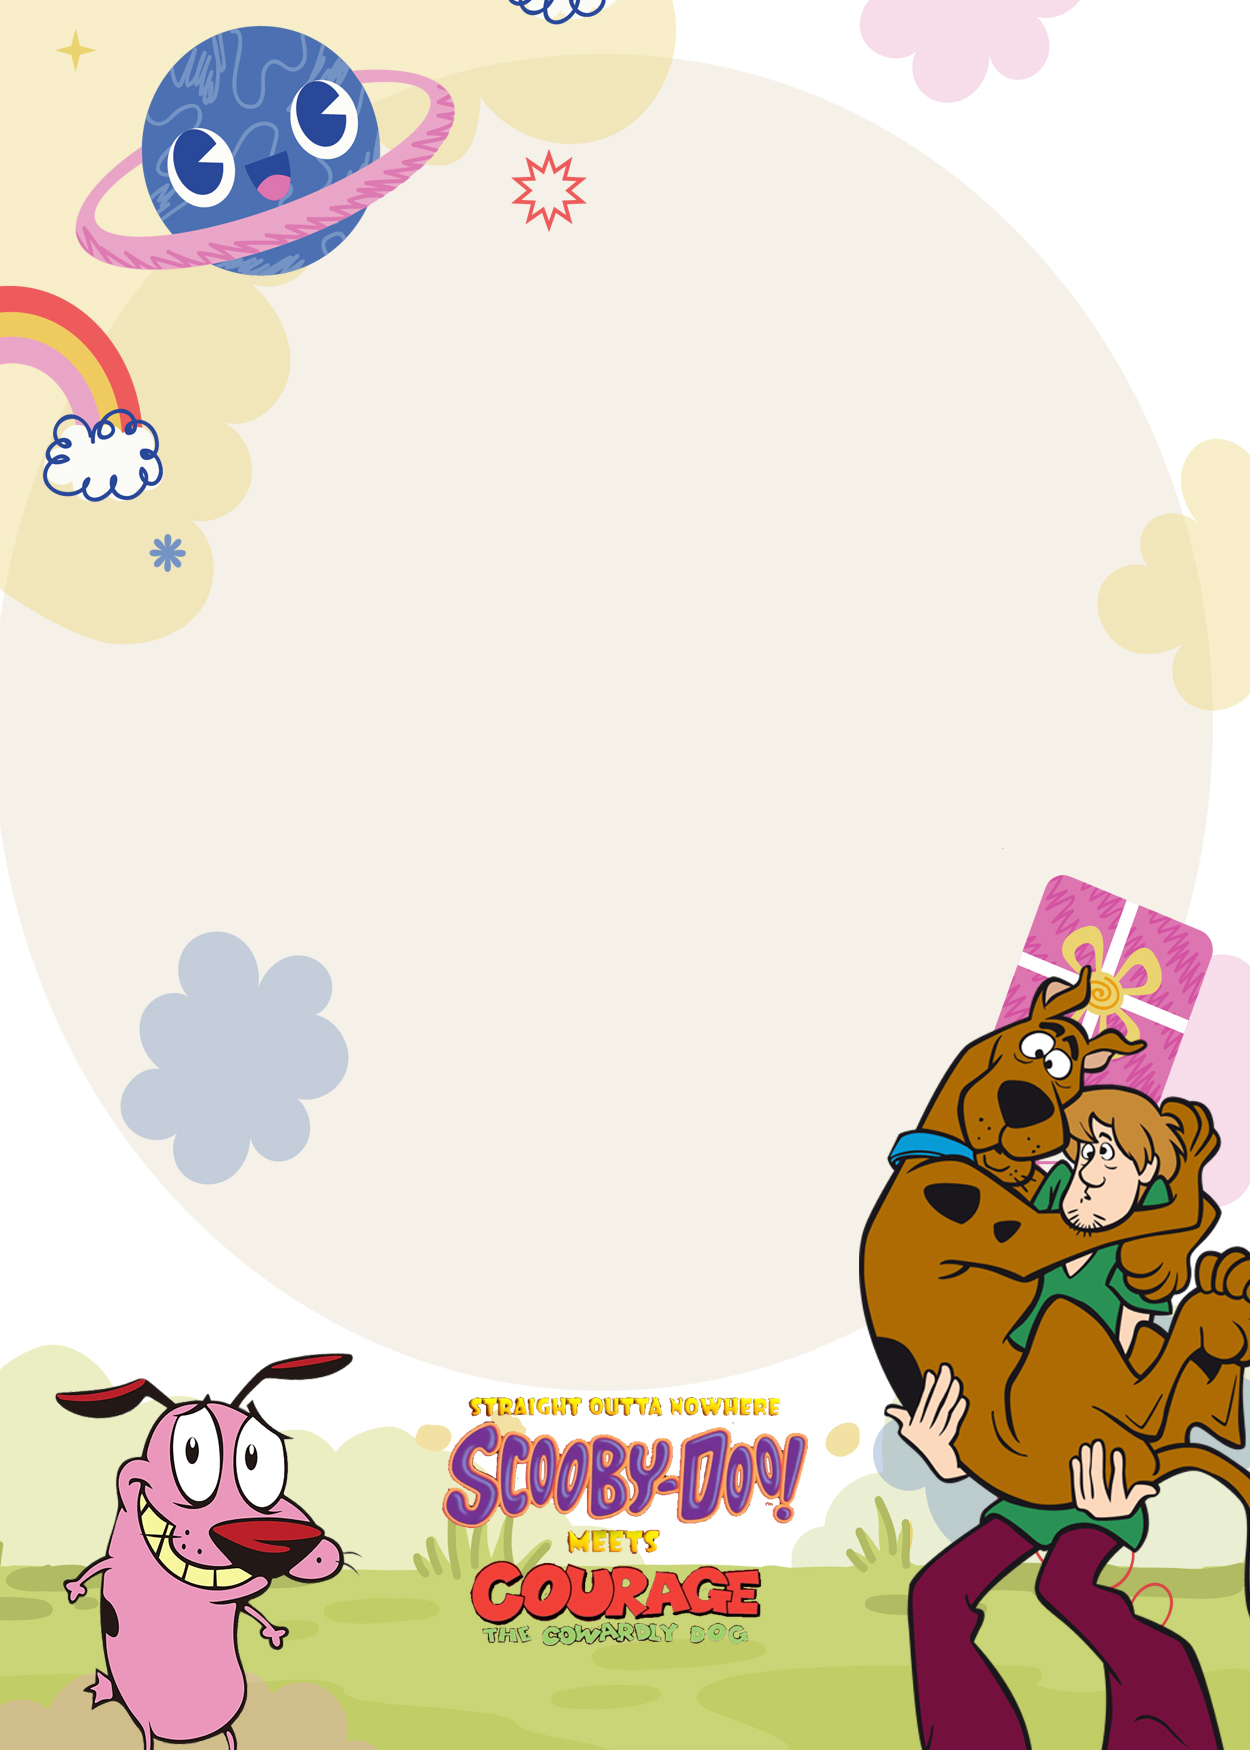 7+ Scooby Doo Meets Courage Birthday Invitation Templates Four